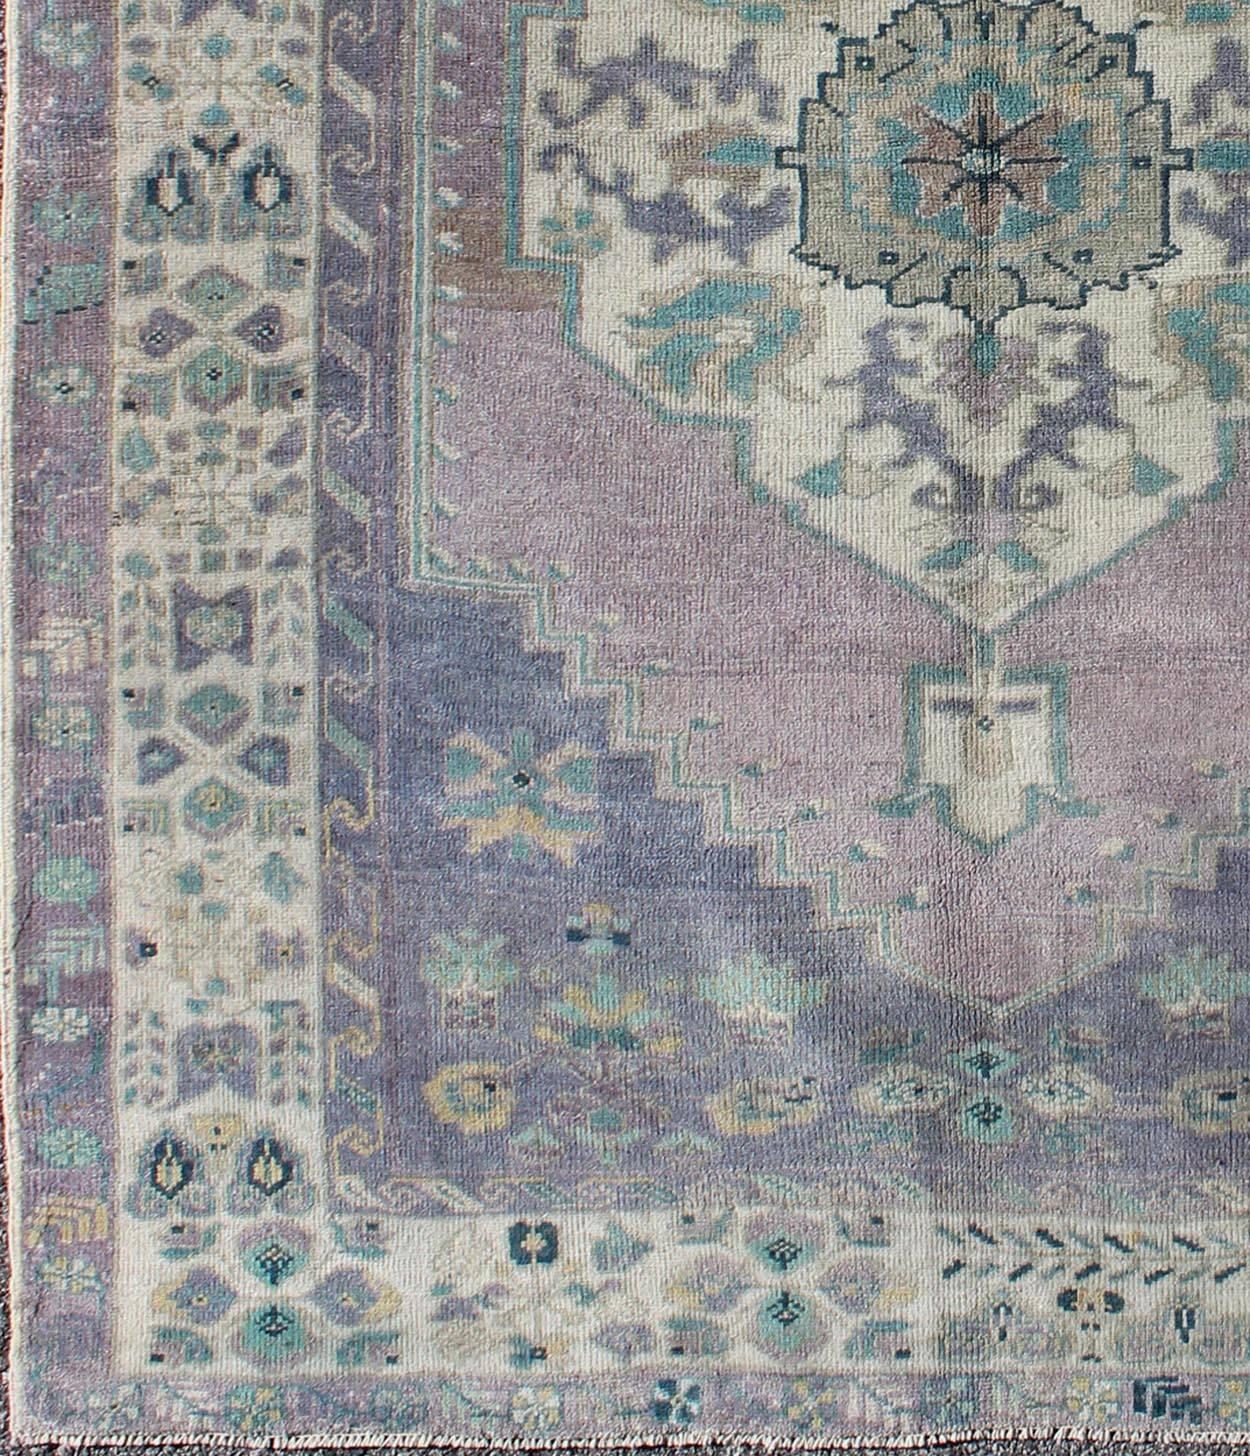 This vintage Turkish Oushak rug features an intricately beautiful design with a floral aesthetic. The central medallion is surrounded by multi-layers in the central field. The various shades of lavender, teal, gray, and cream blend beautifully with